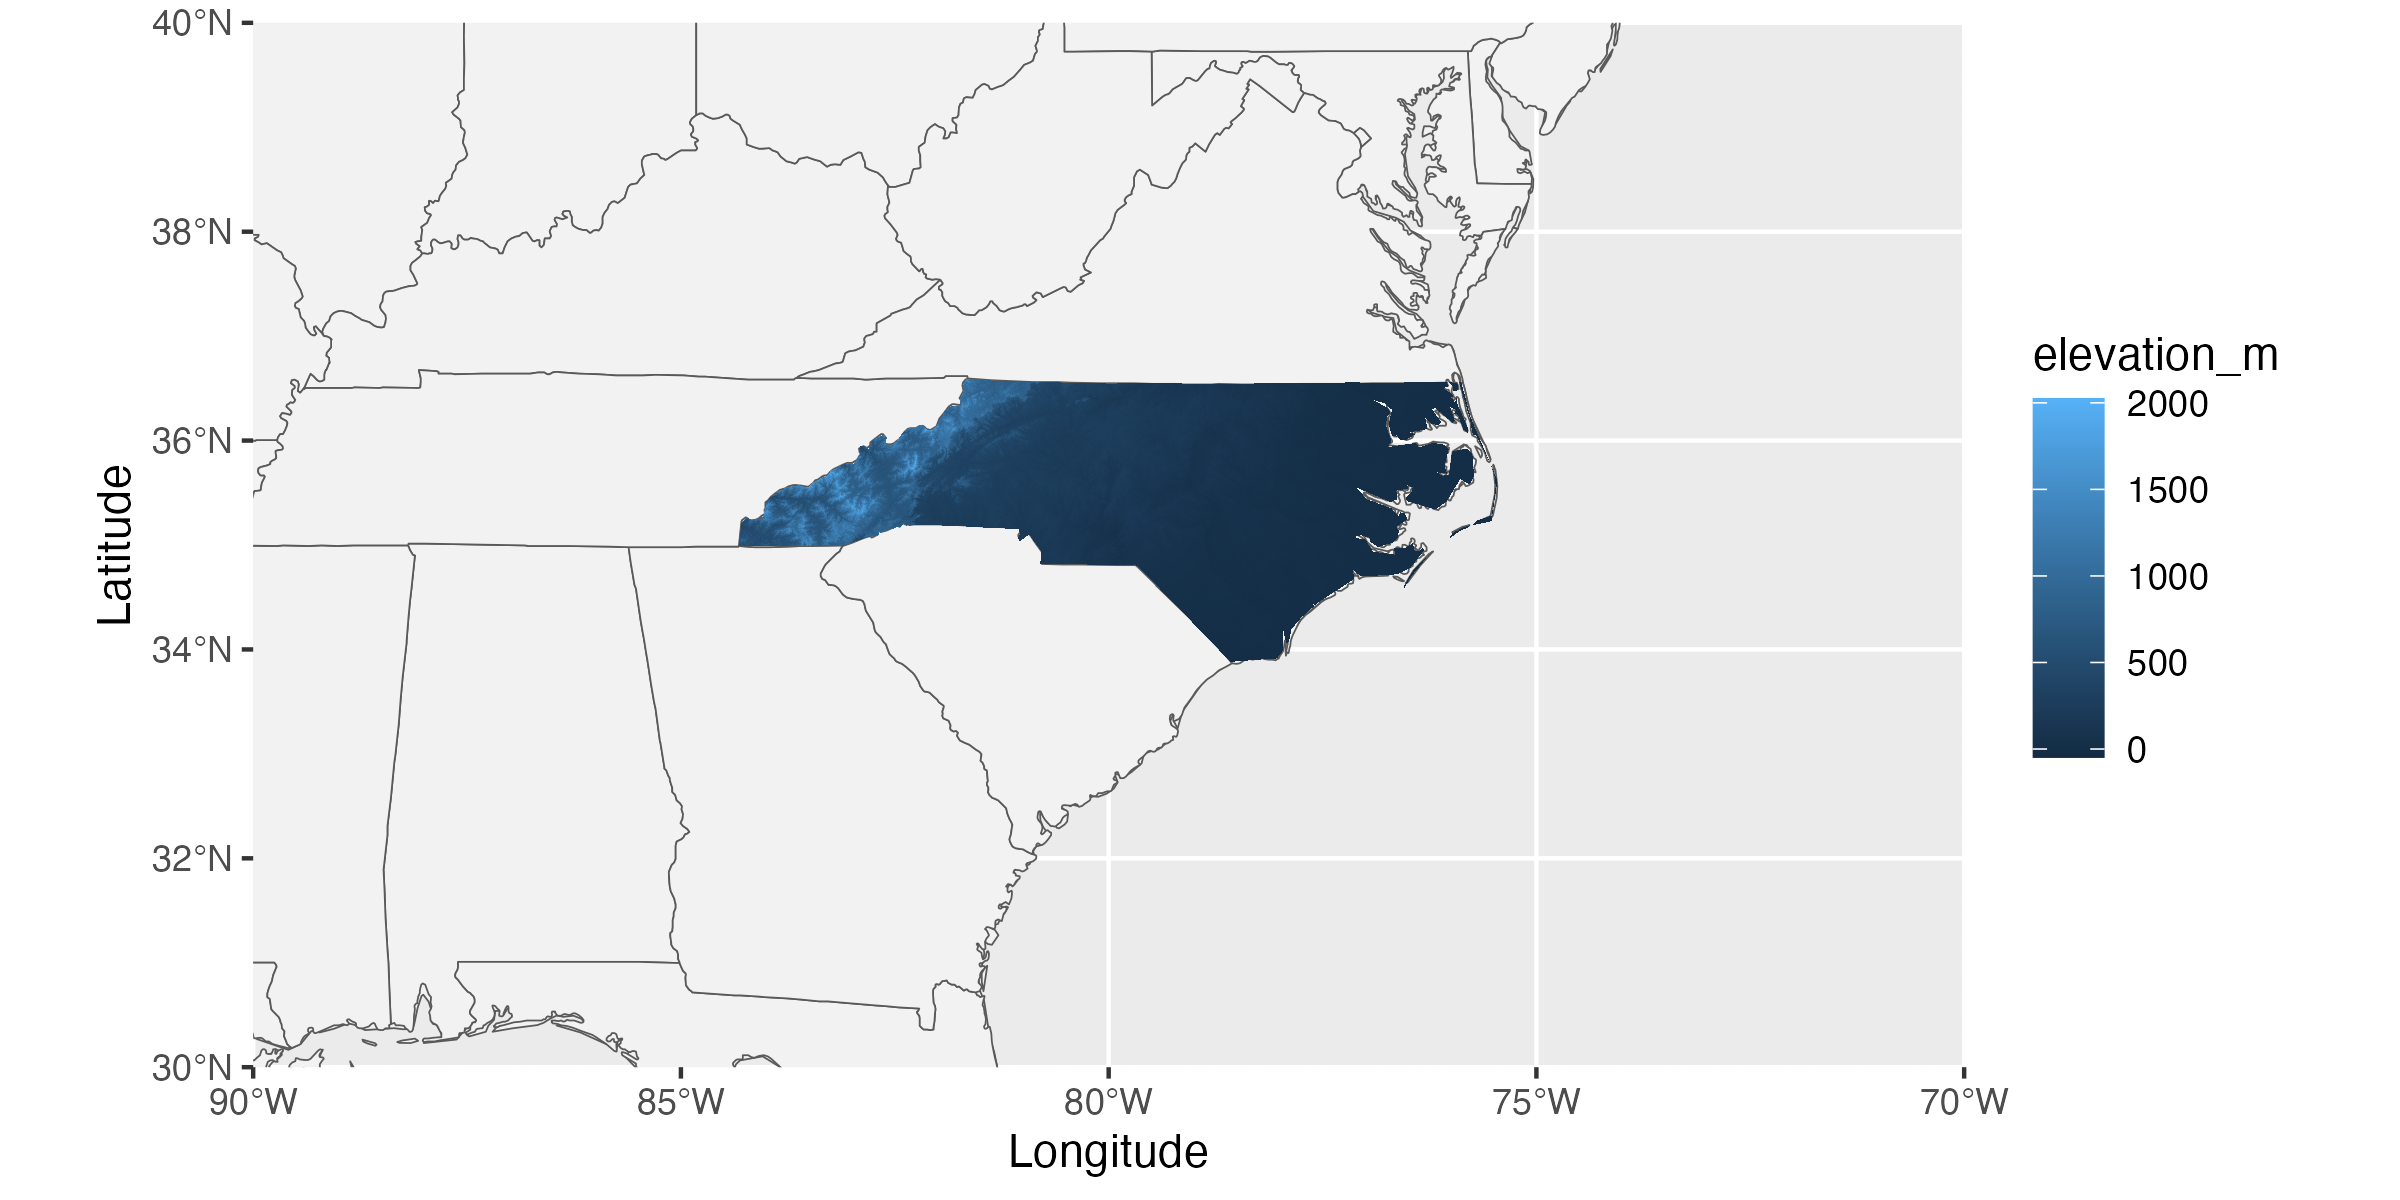 ggplot2-style map of the southeastern US where North Carolina is colored based on the per-pixel elevation